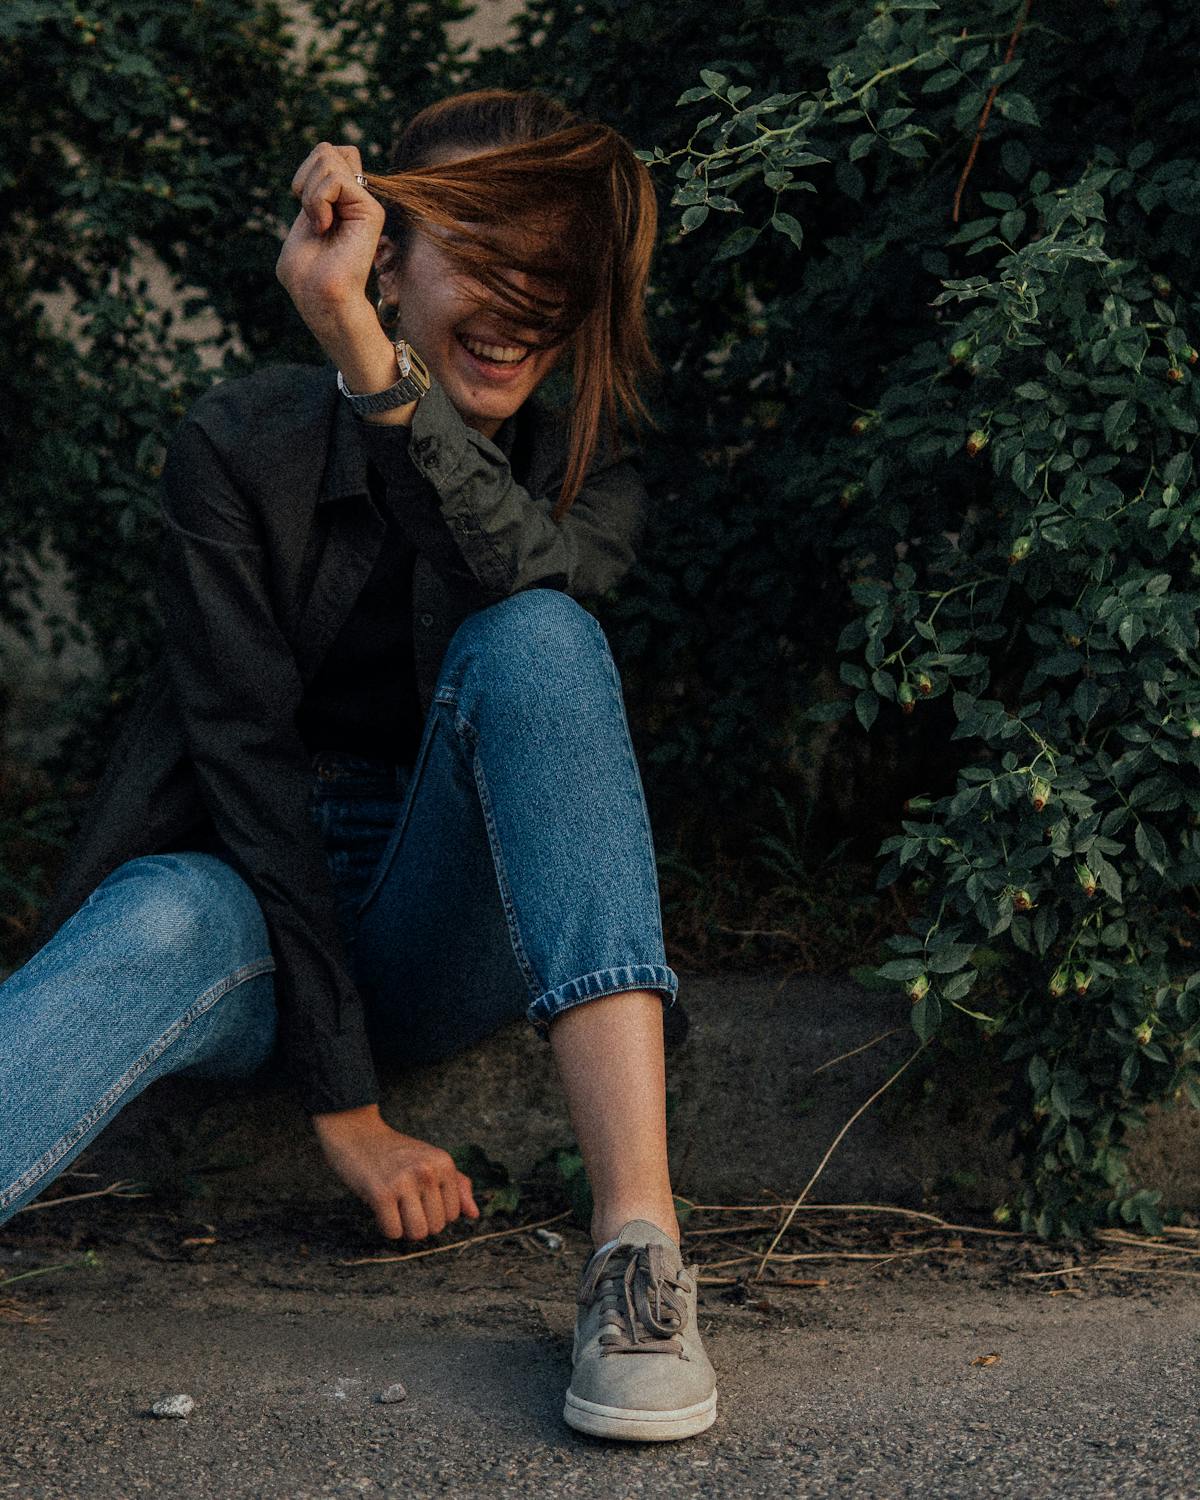 Young woman laughing while sitting on curb · Free Stock Photo